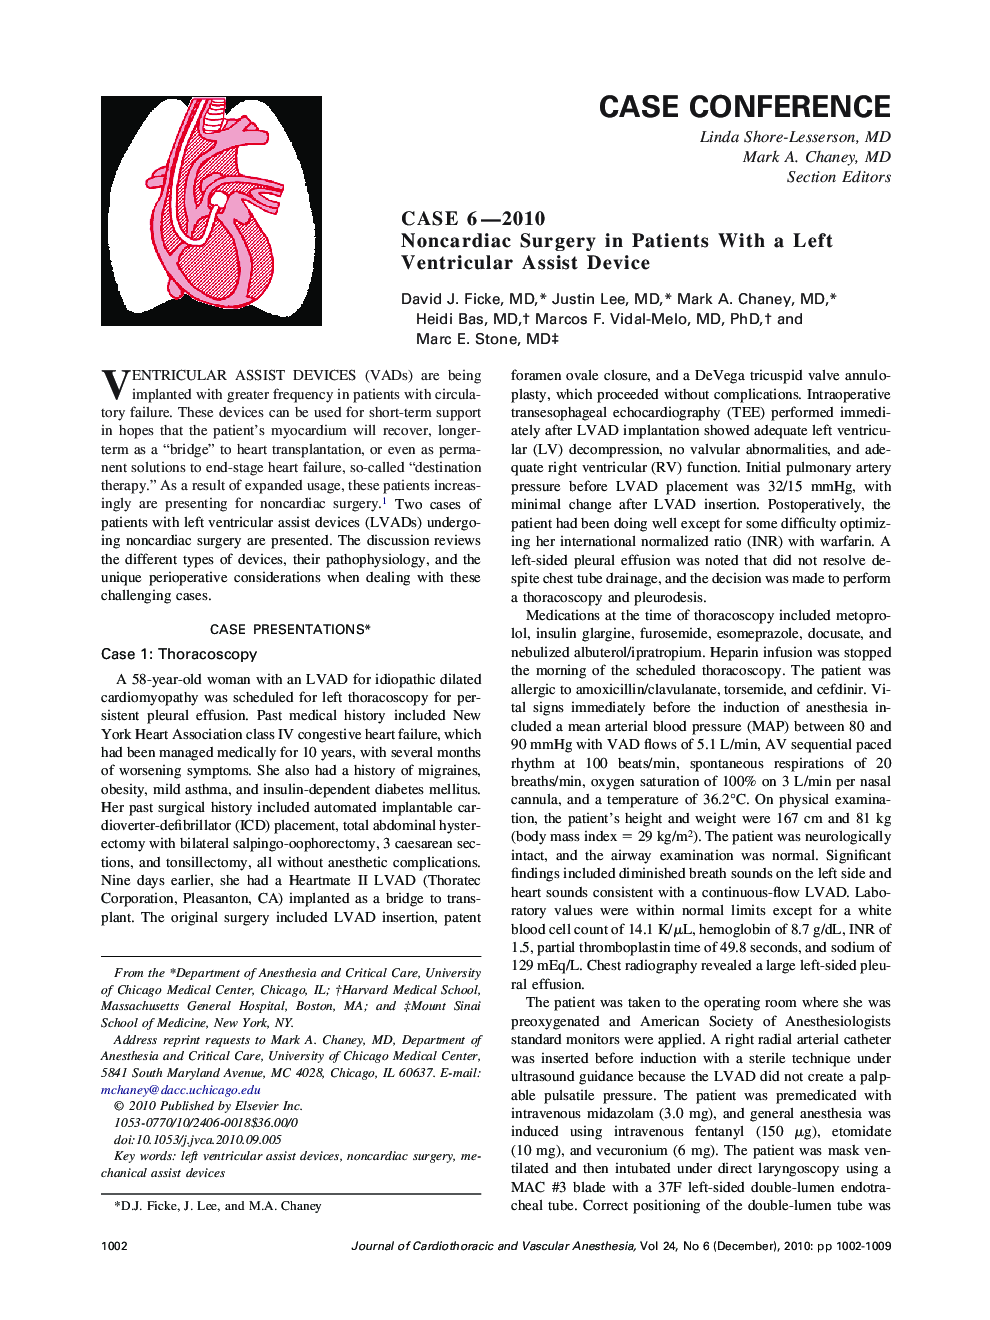 Case 6-2010 Noncardiac Surgery in Patients With a Left Ventricular Assist Device